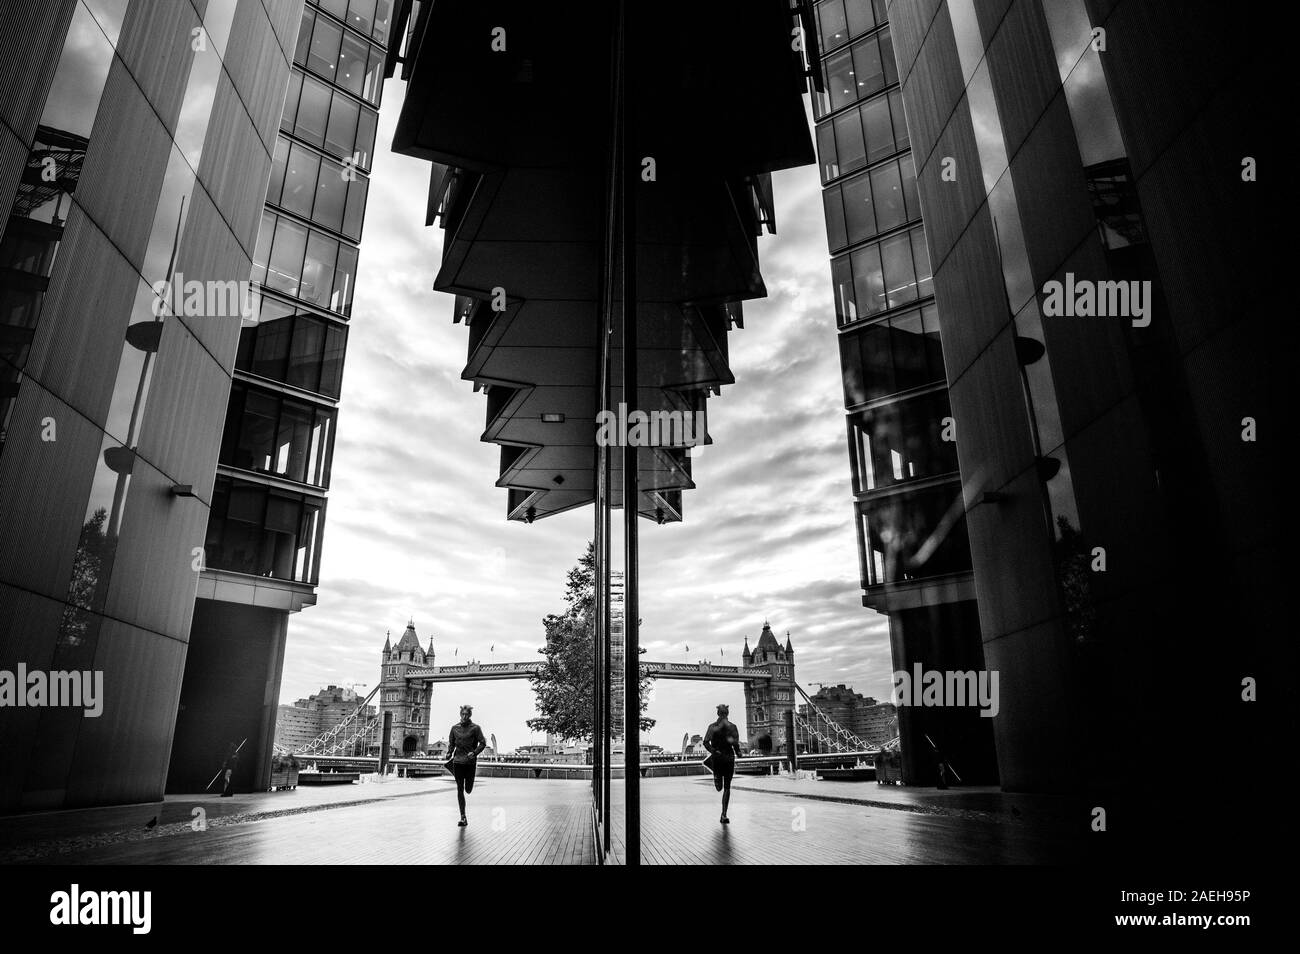 Athlete run in London between buildings, Tower Bridge in background. Black and white photo. Stock Photo